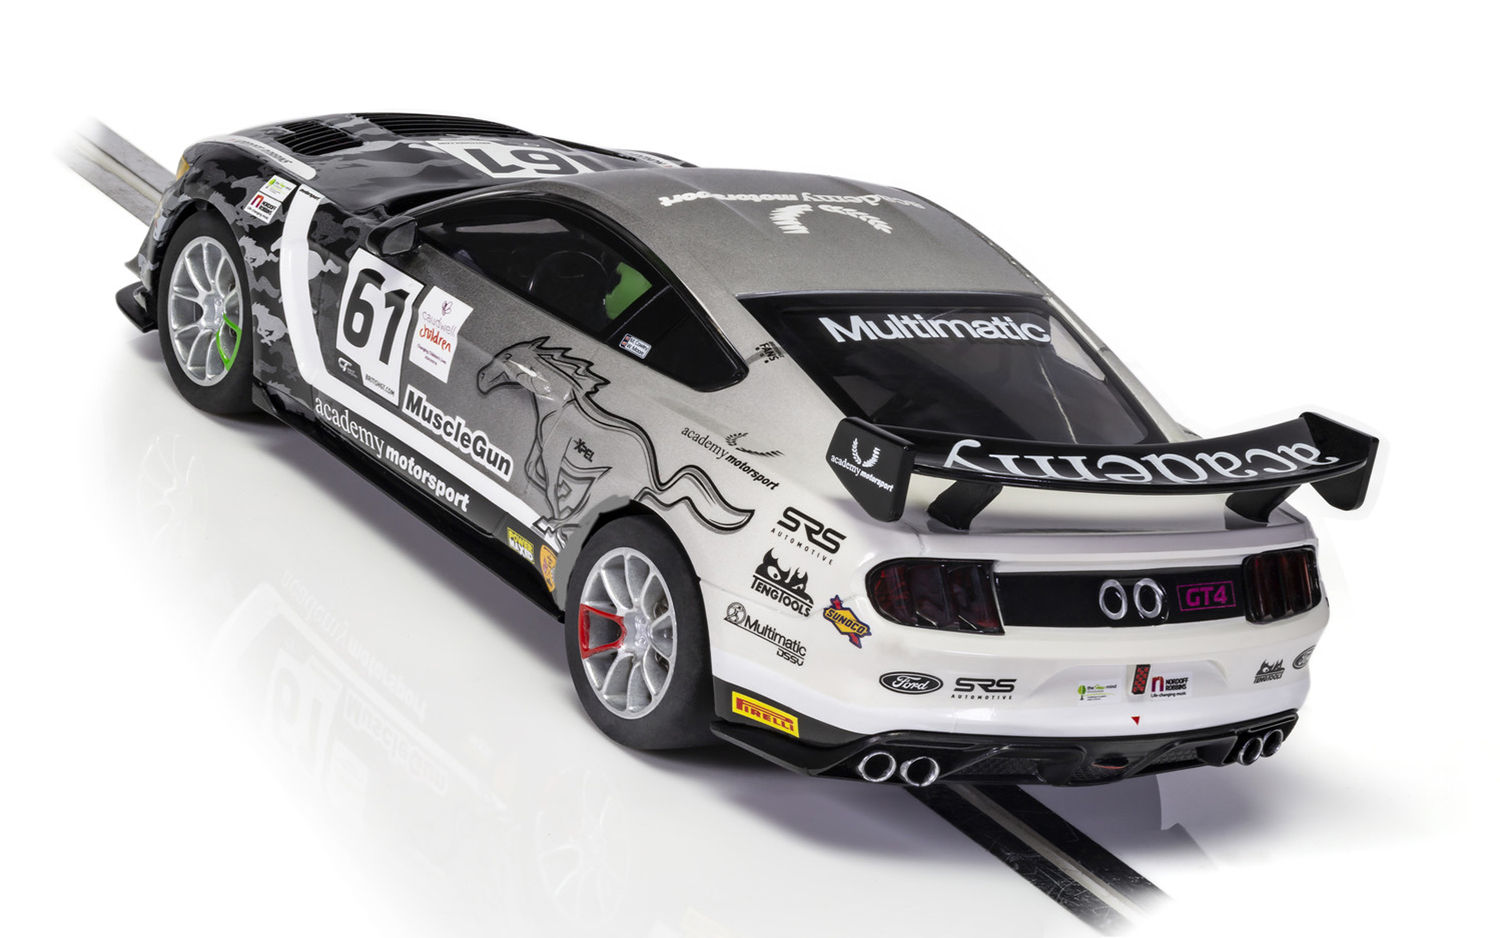 Academy Motorsport 2020 1:32 Slot Car *DPR* Scalextric C4221 Ford Mustang GT4 